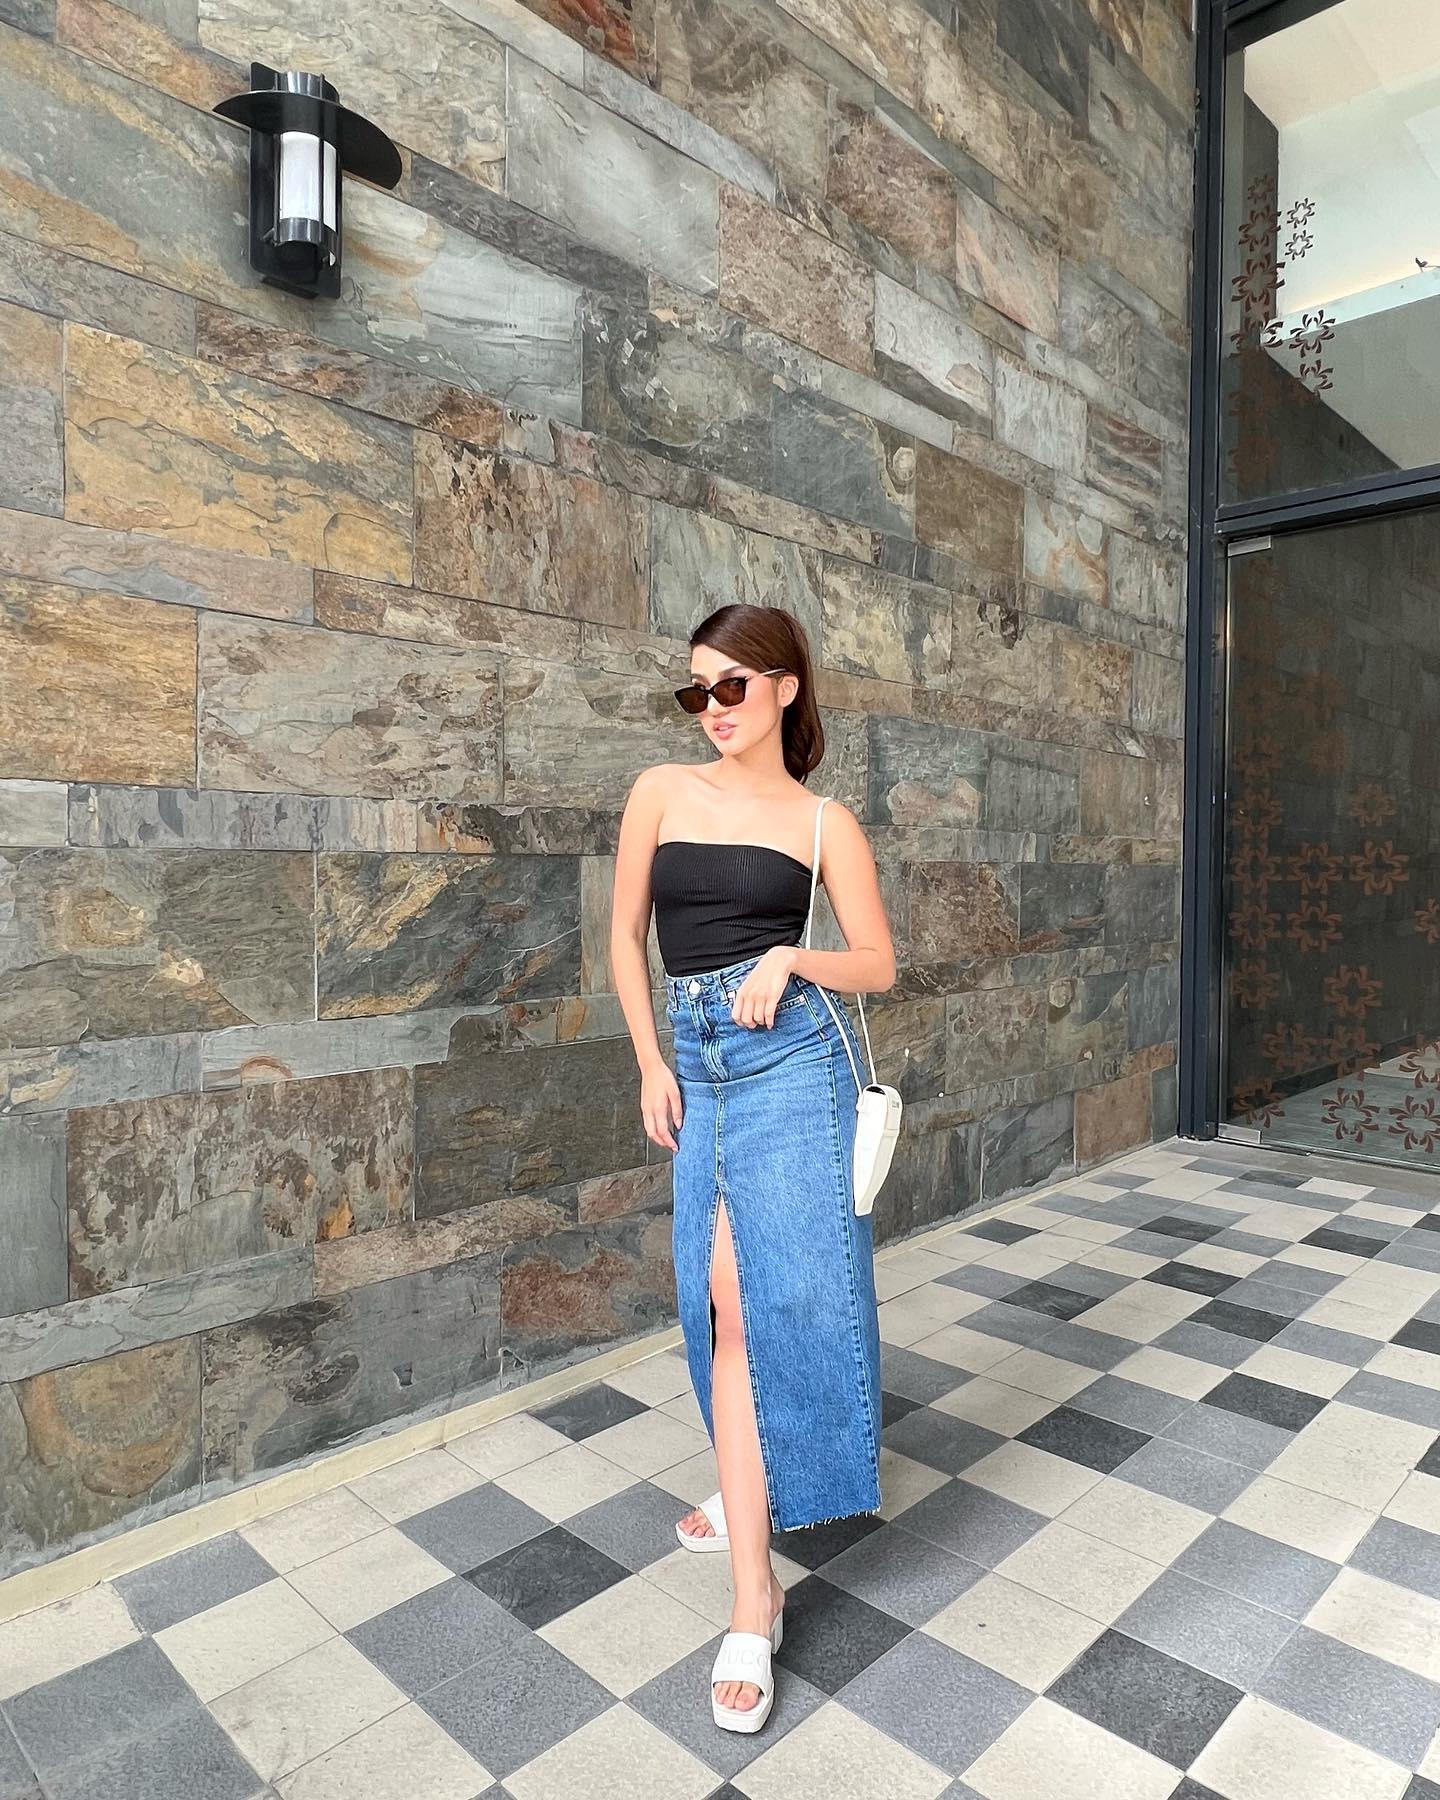 3 Ways to a Style Bandeau Top with Cosabella - Frank Vinyl Fashion Blogger